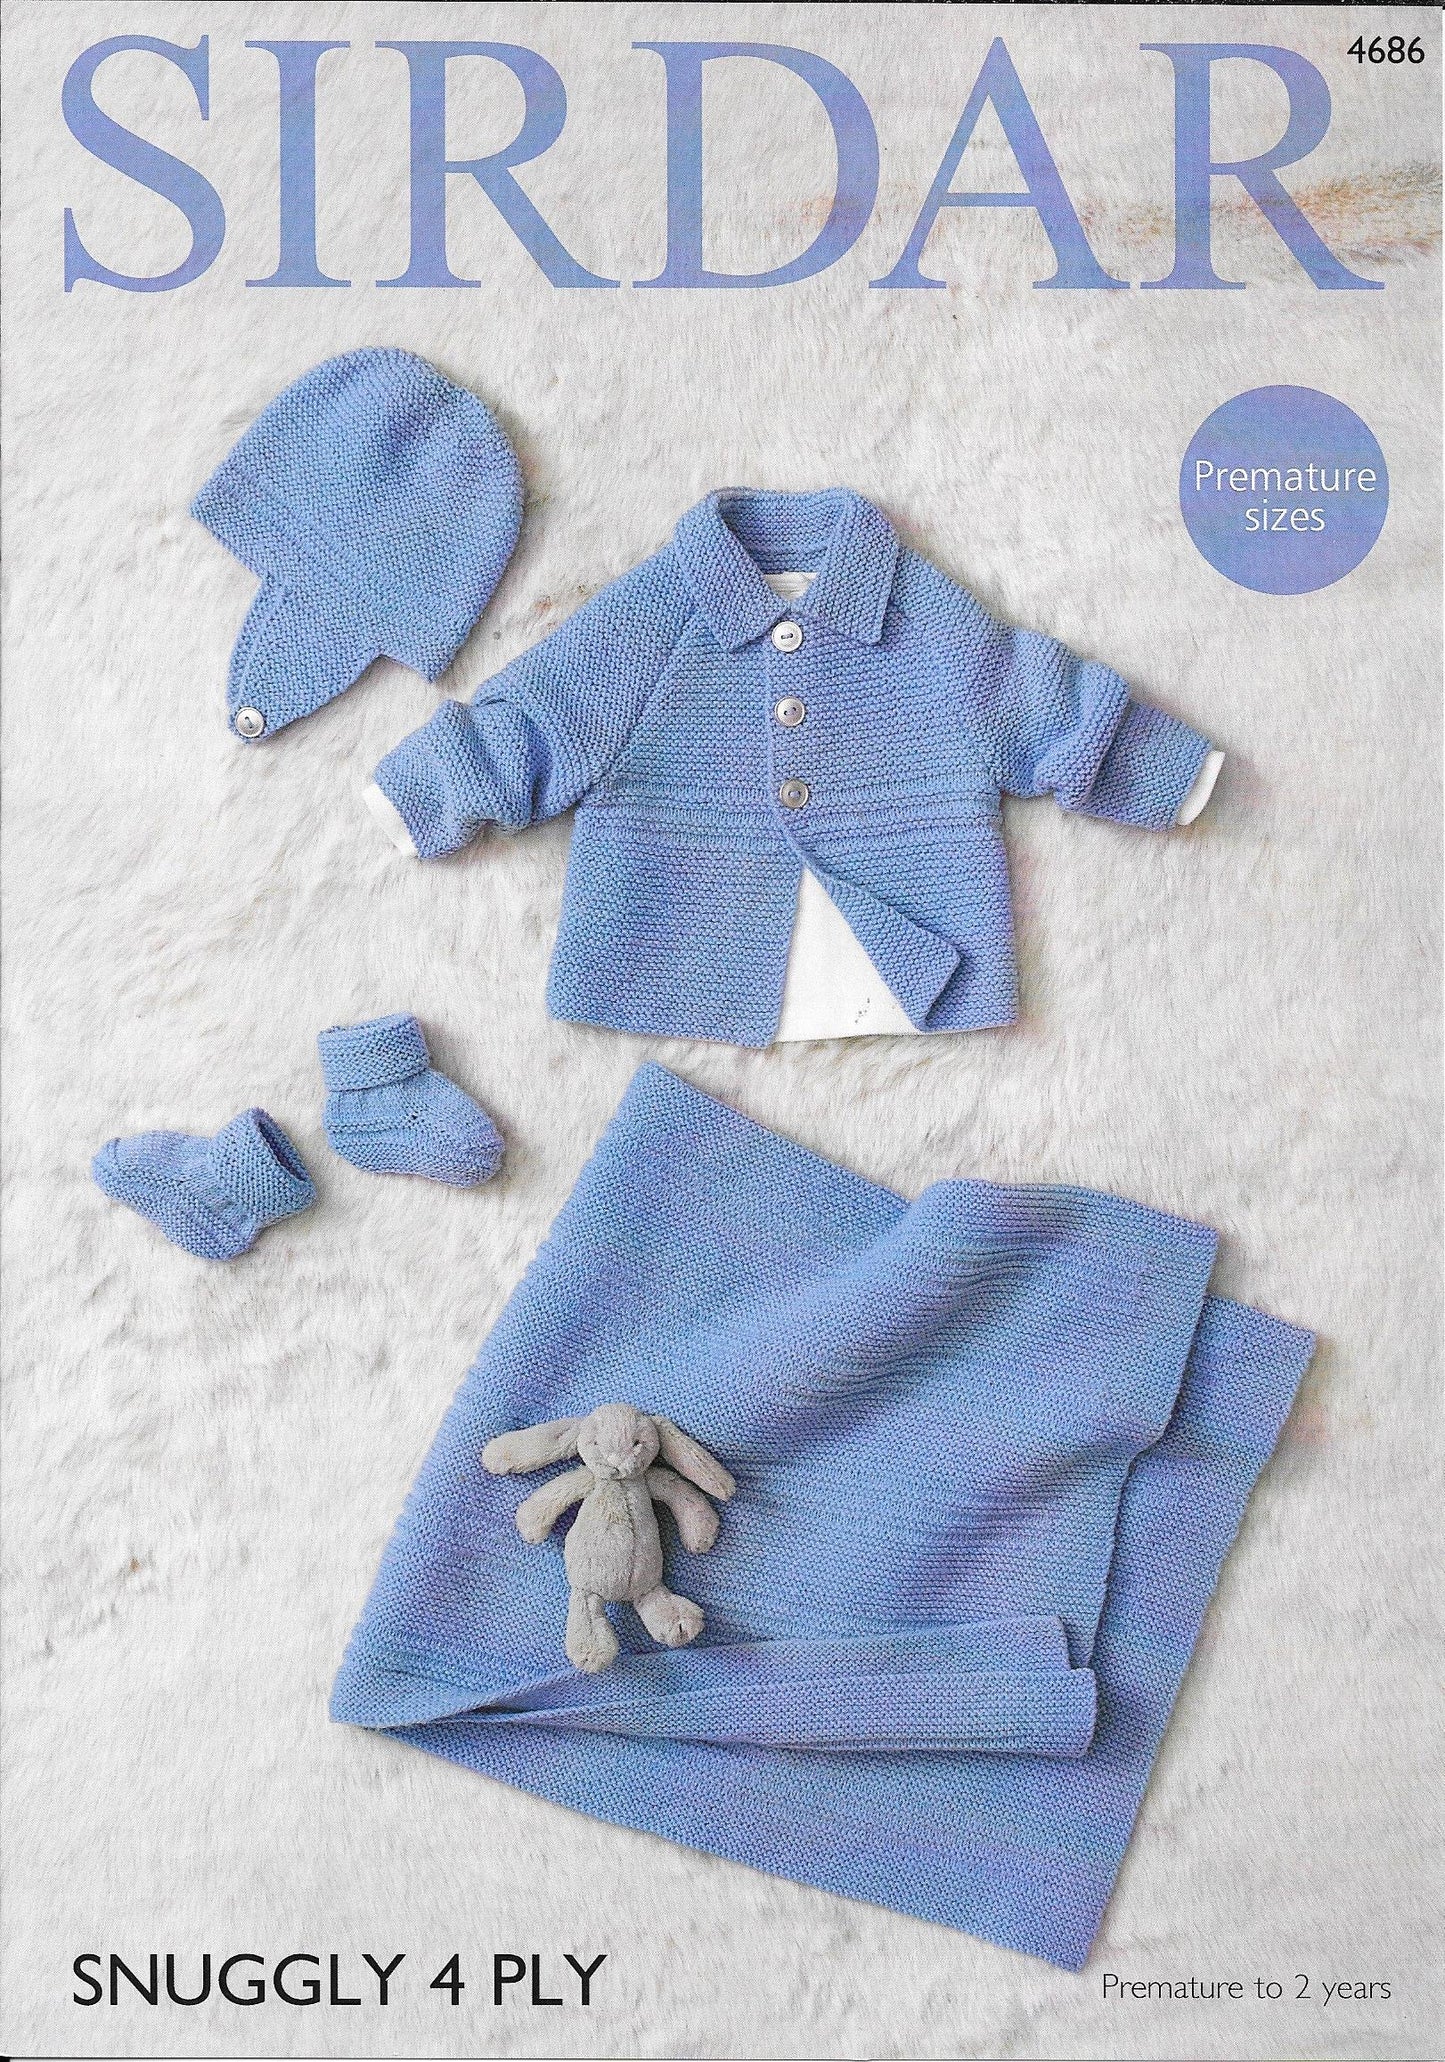 4686 Sirdar Snuggly 4 ply premature to 2 years jacket, helmet, bootees and blanket knitting pattern